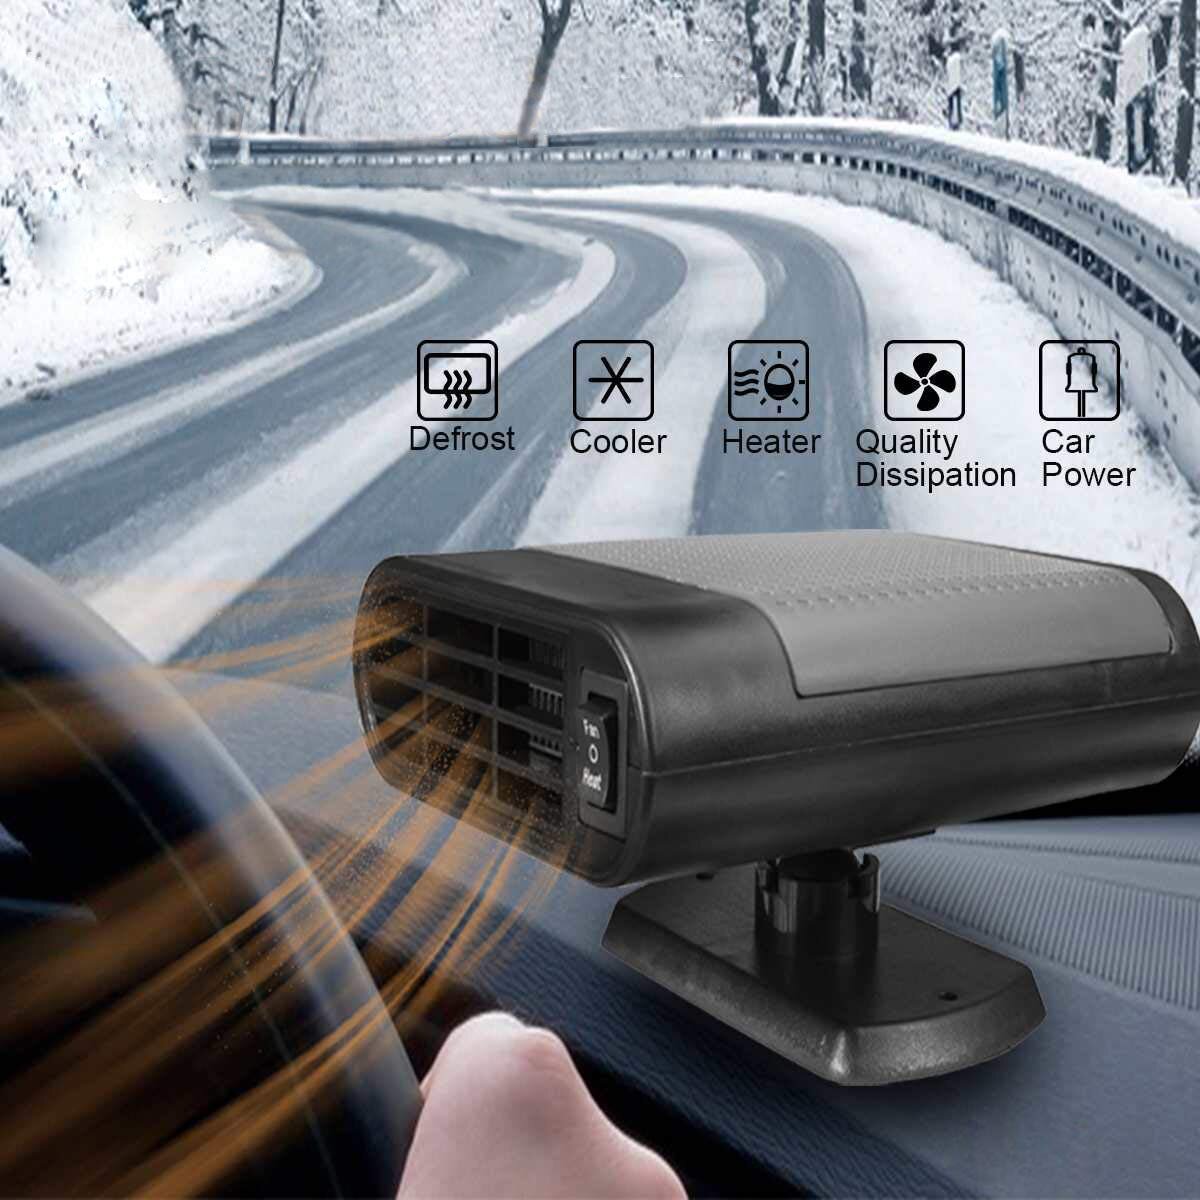 Grey Upgrade Portable 2 in 1 Car Heater Defroster Car Air Fan Window Demister 30 Seconds Fast Heating Quickly Defrosts Defogger,12V 150W Portable Auto Ceramic Heater